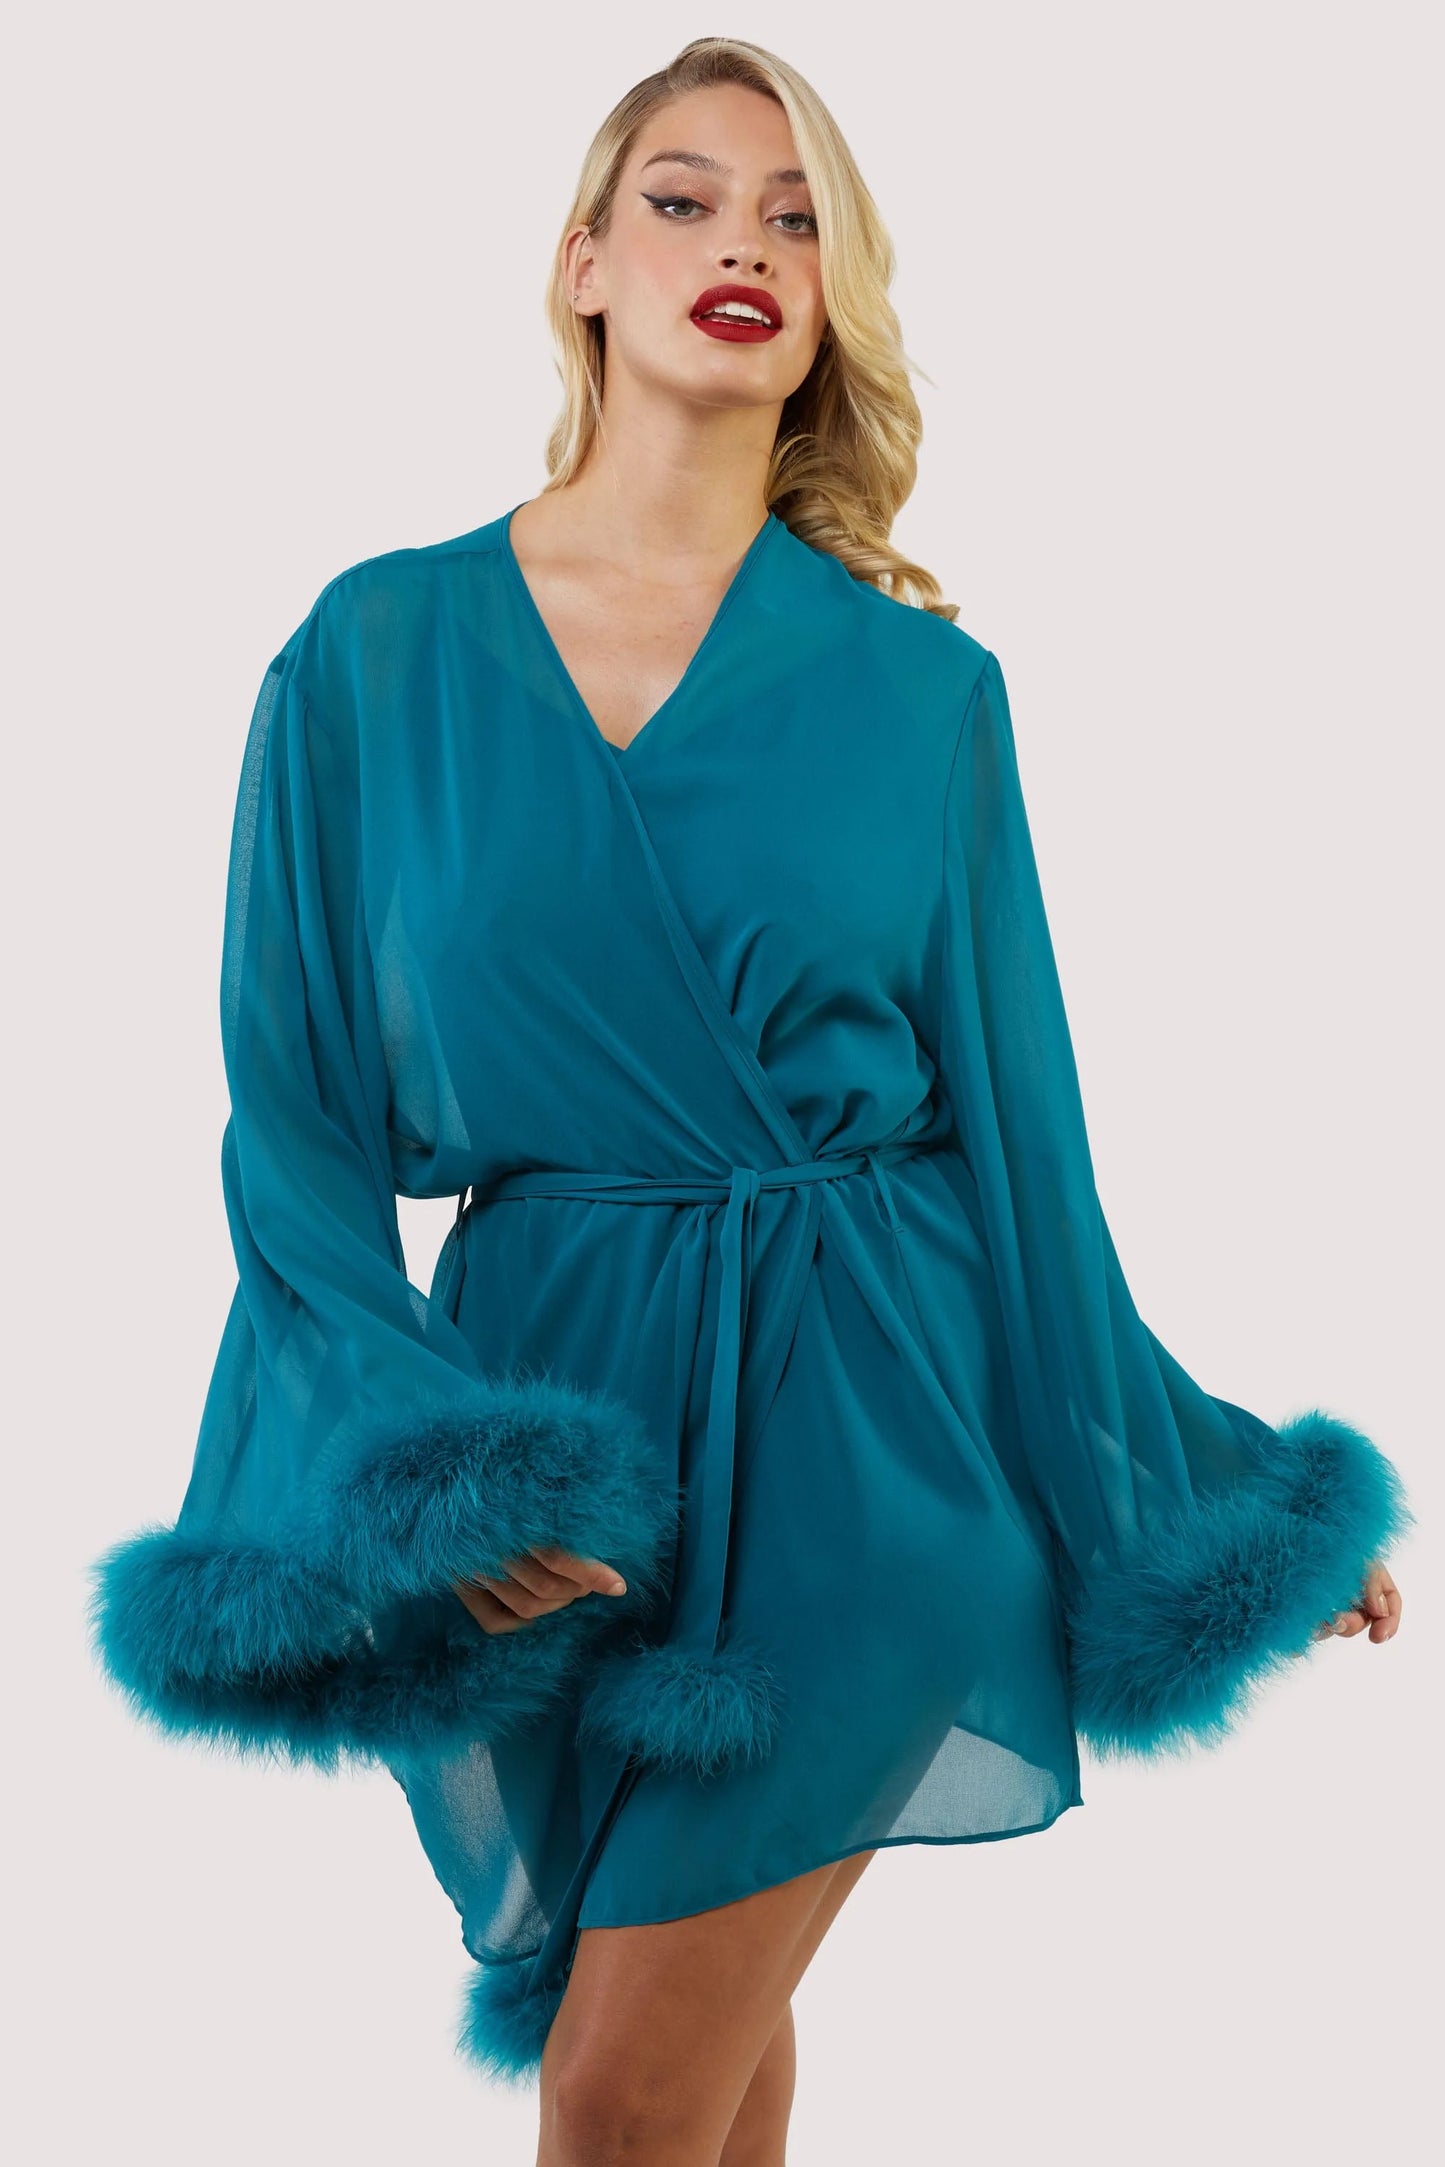 Teal Feather Trim Robe - sizes 4-16